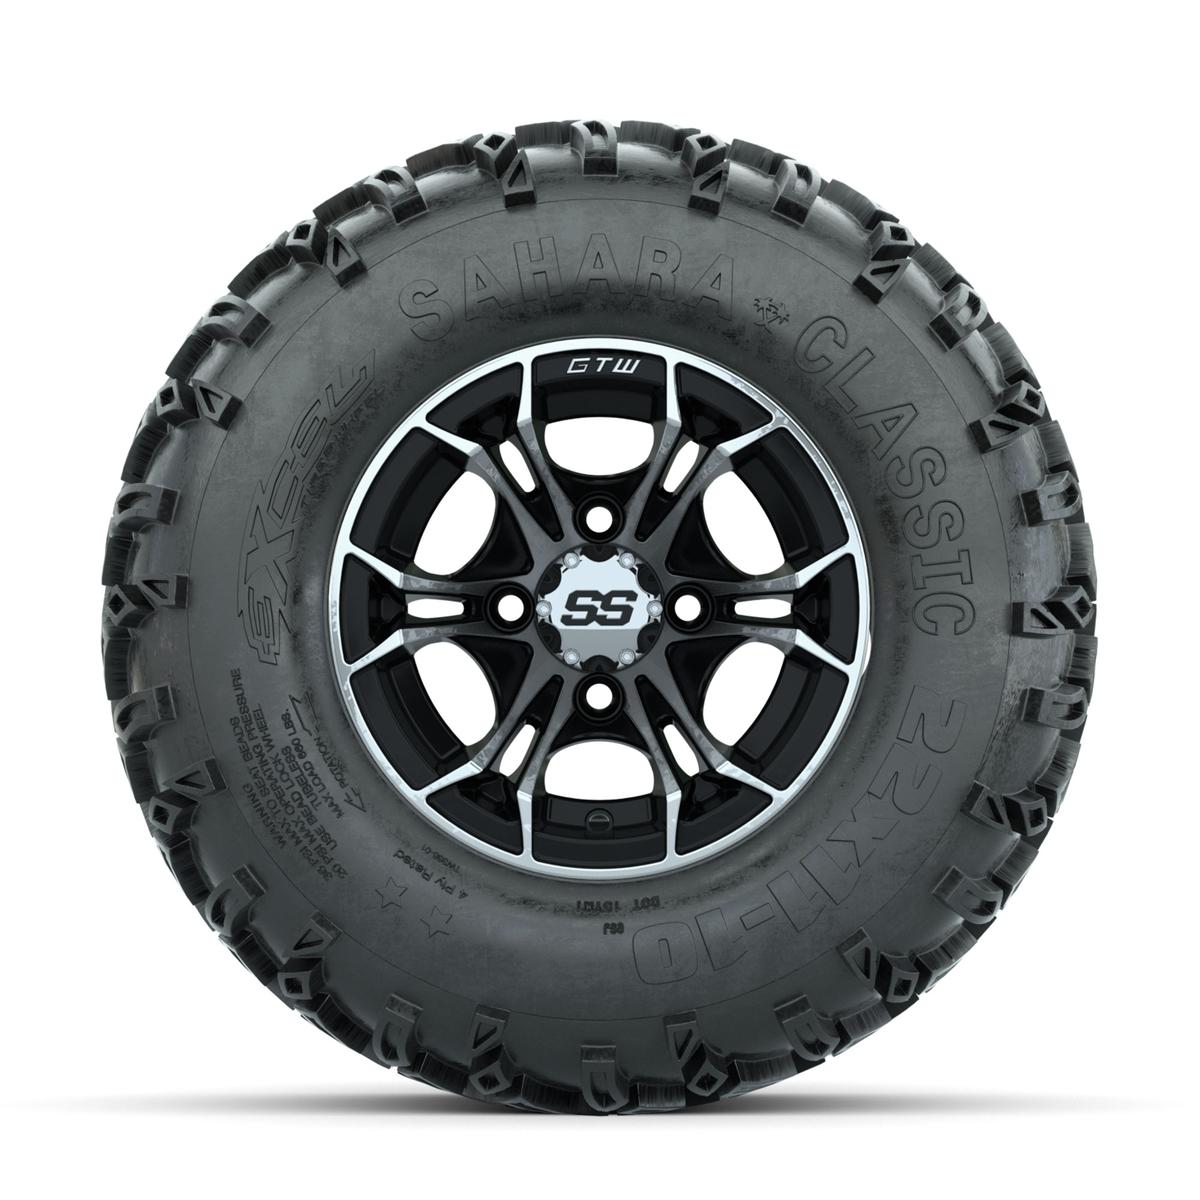 GTW Spyder Machined/Black 10 in Wheels with 22x11-10 Sahara Classic All Terrain Tires �� Full Set